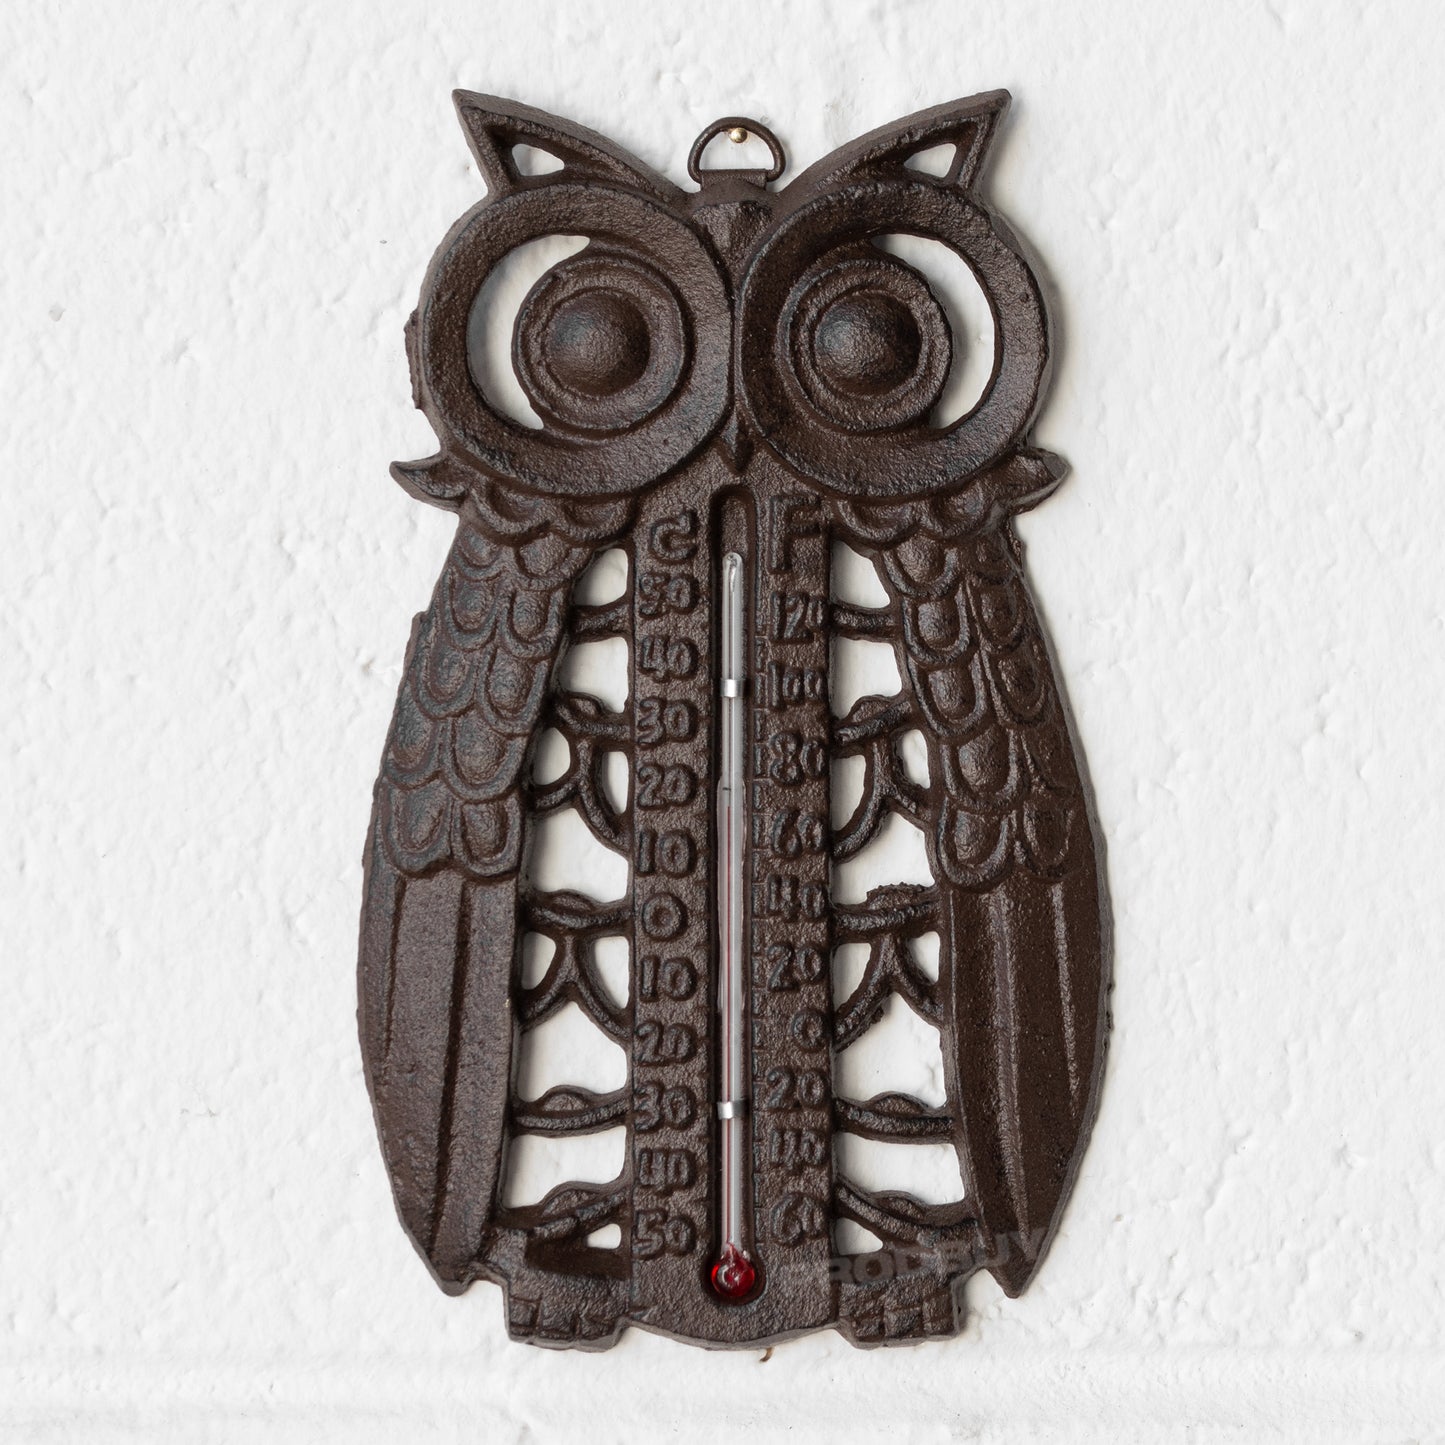 Cast Iron Wall Mounted Owl Outdoor Garden Thermometer